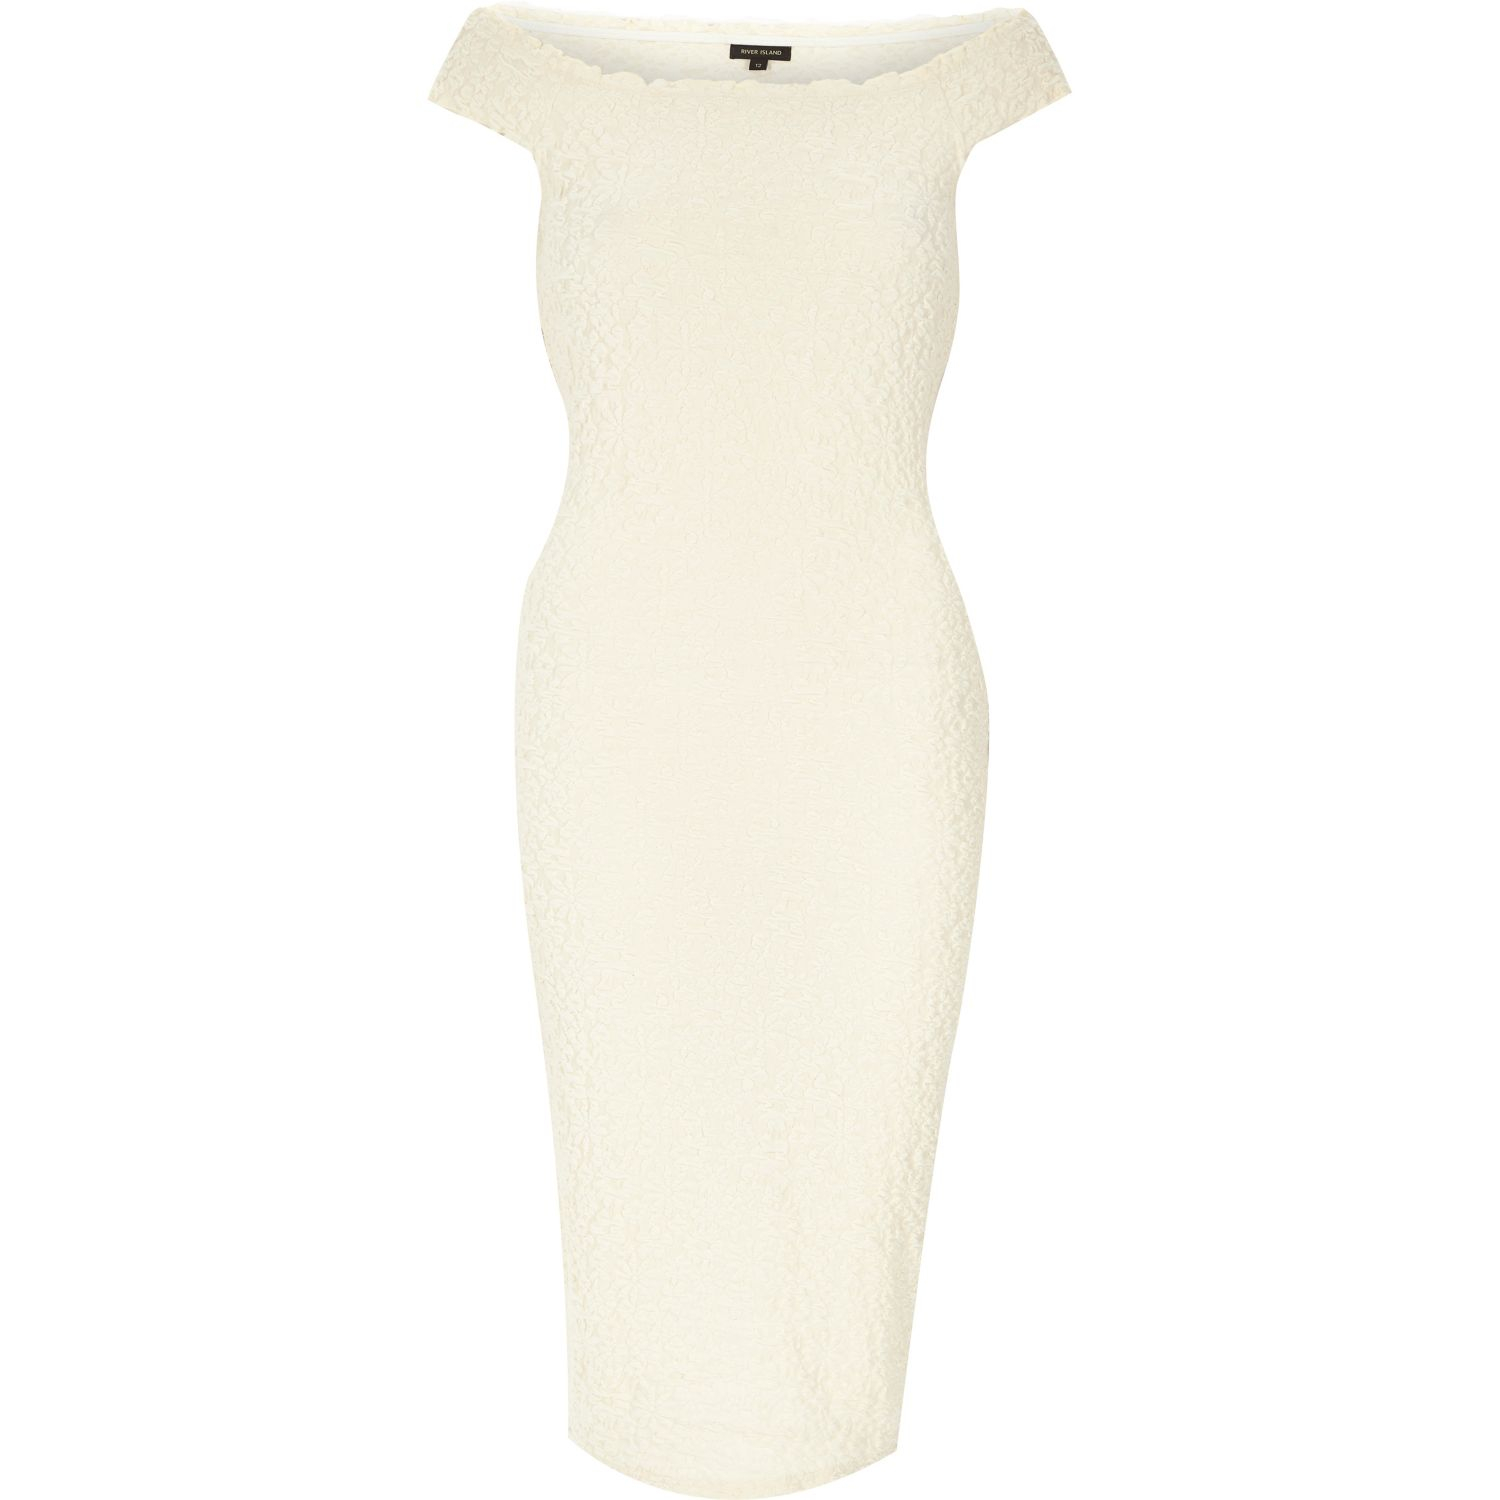 River Island Yellow Bardot Dress & Help You Stand Out